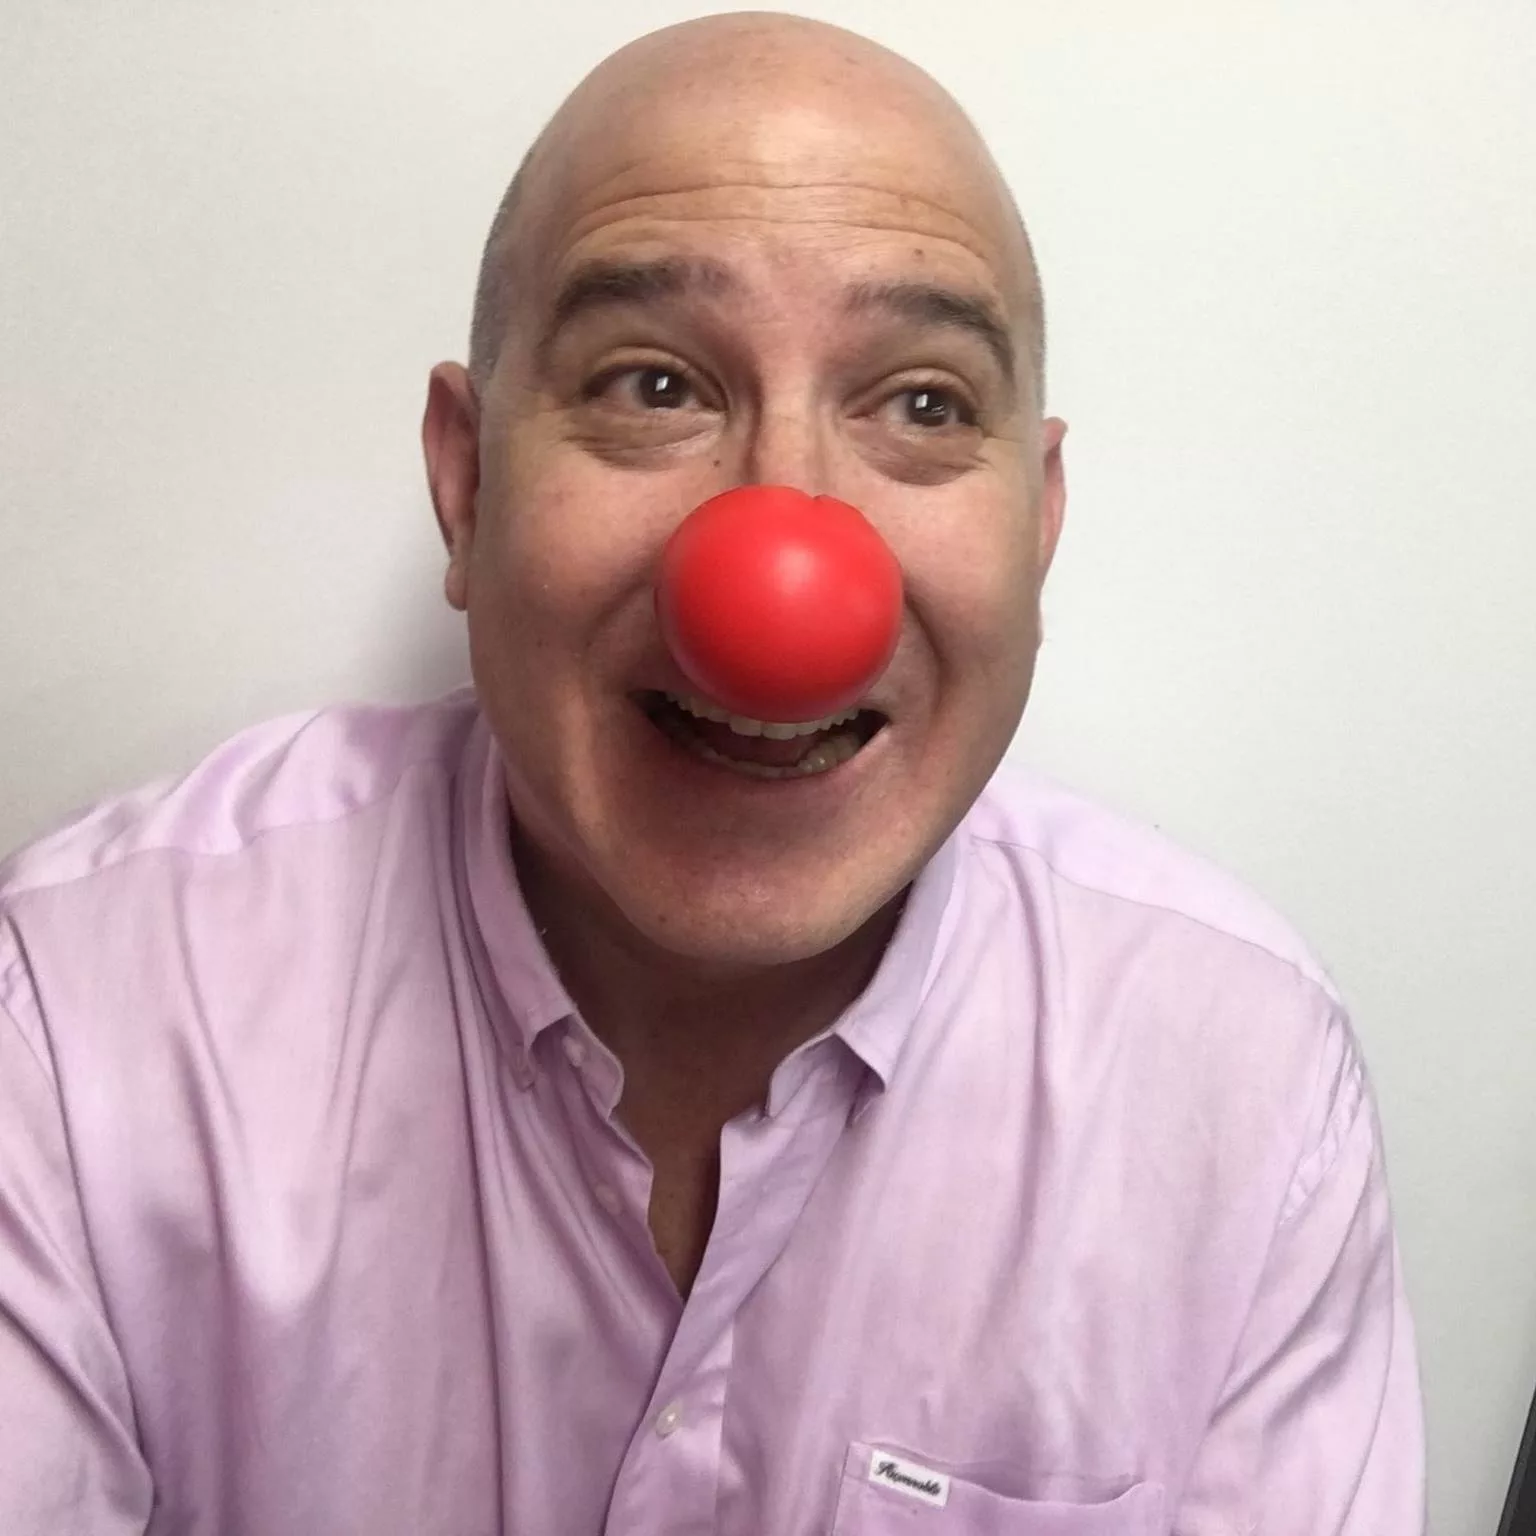 Man in pink shirt smiling with a red clown nose